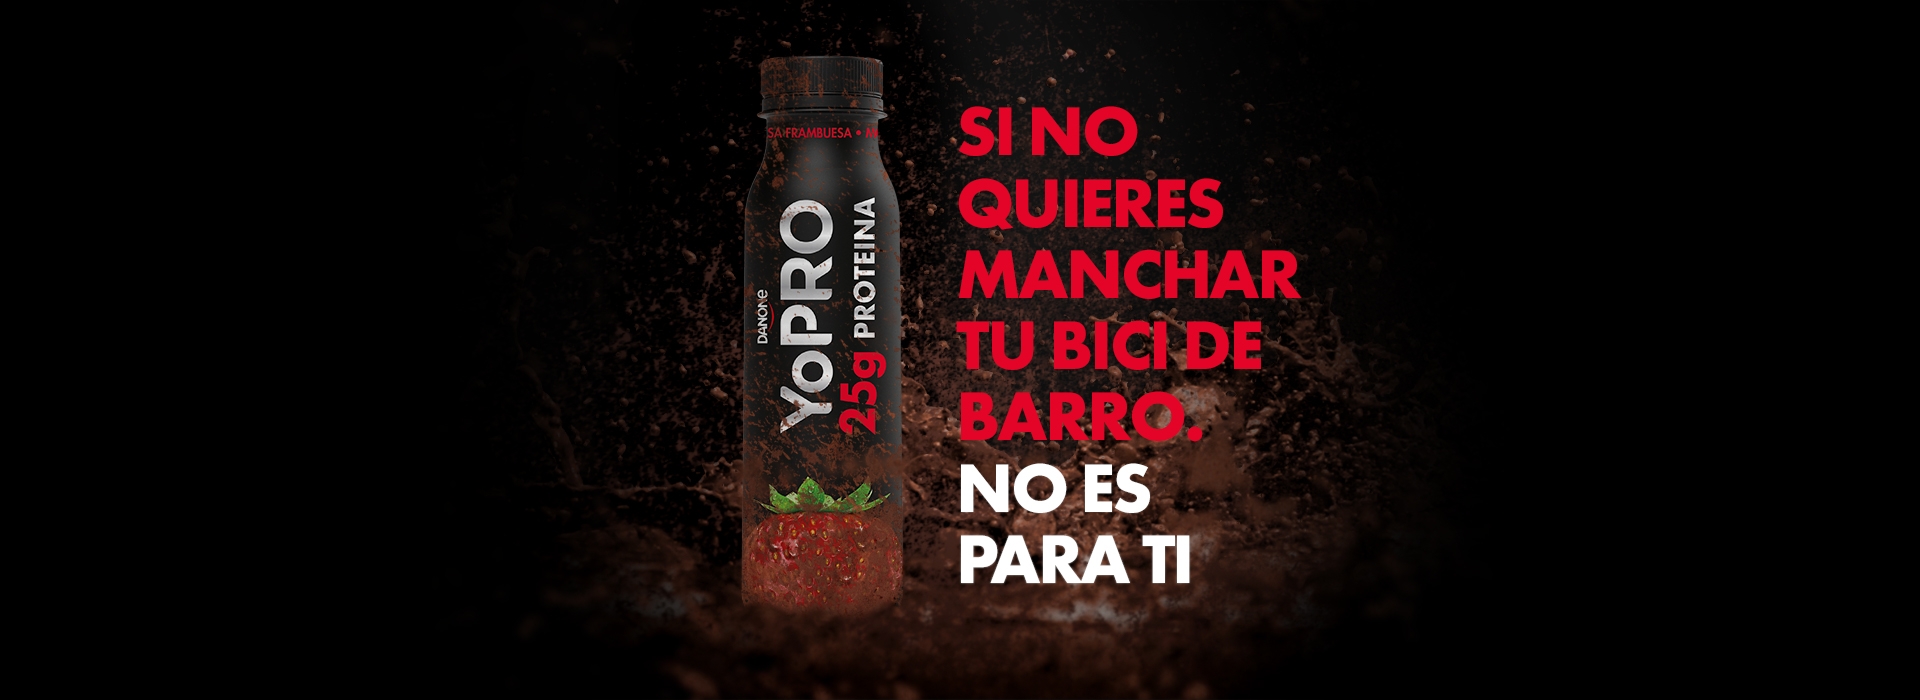  Improve your performance will be possible with YoPro